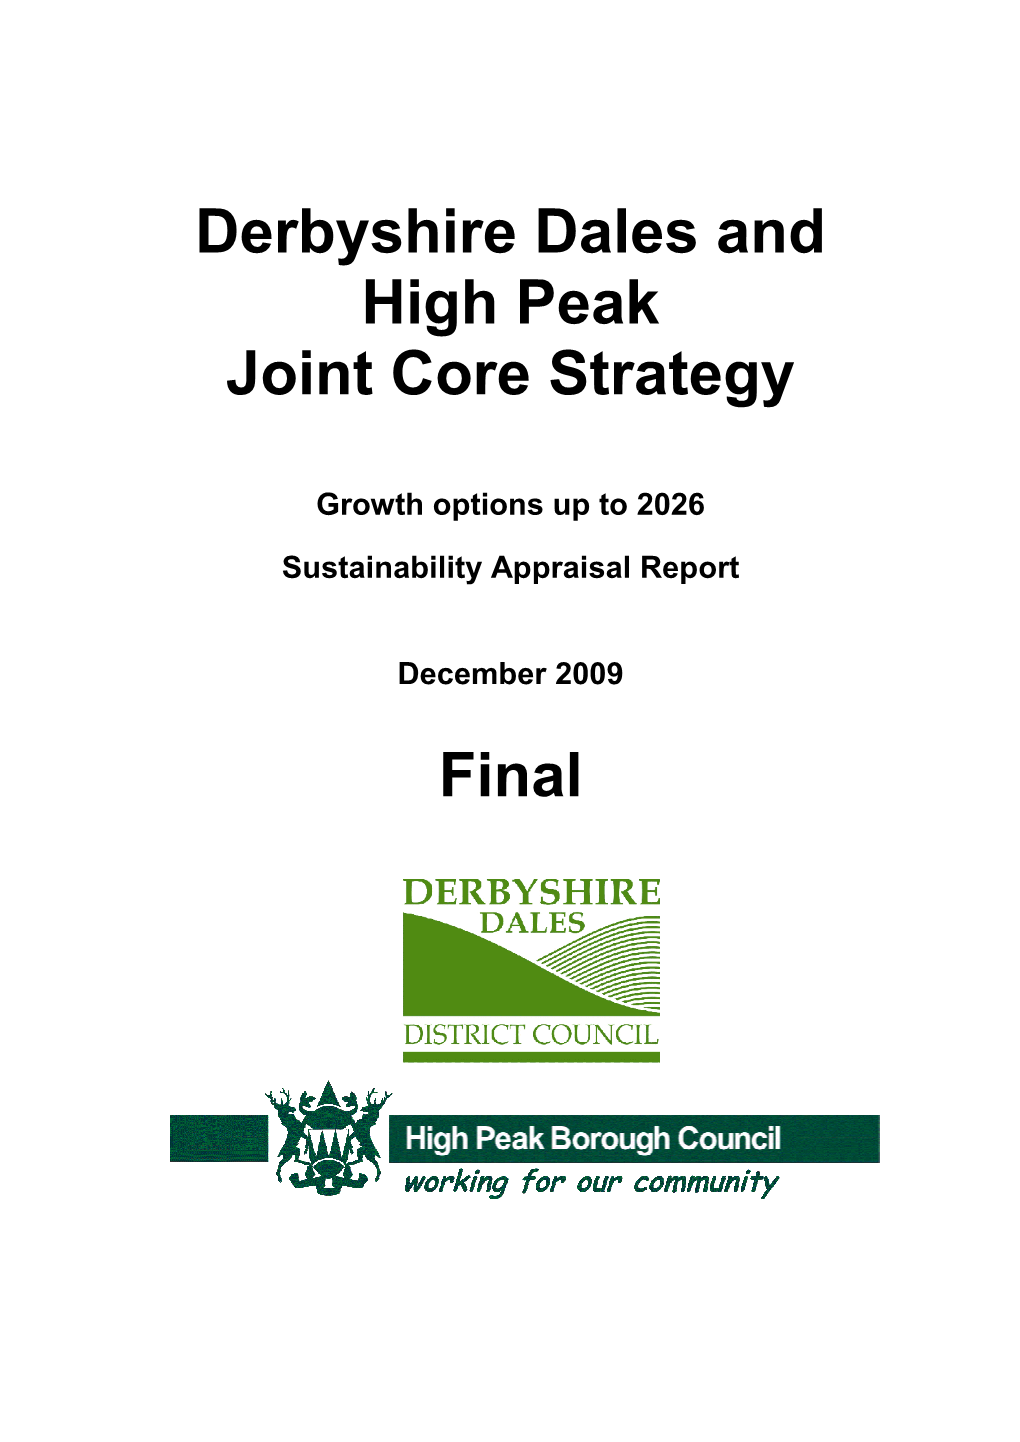 Derbyshire Dales and High Peak Joint Core Strategy Final